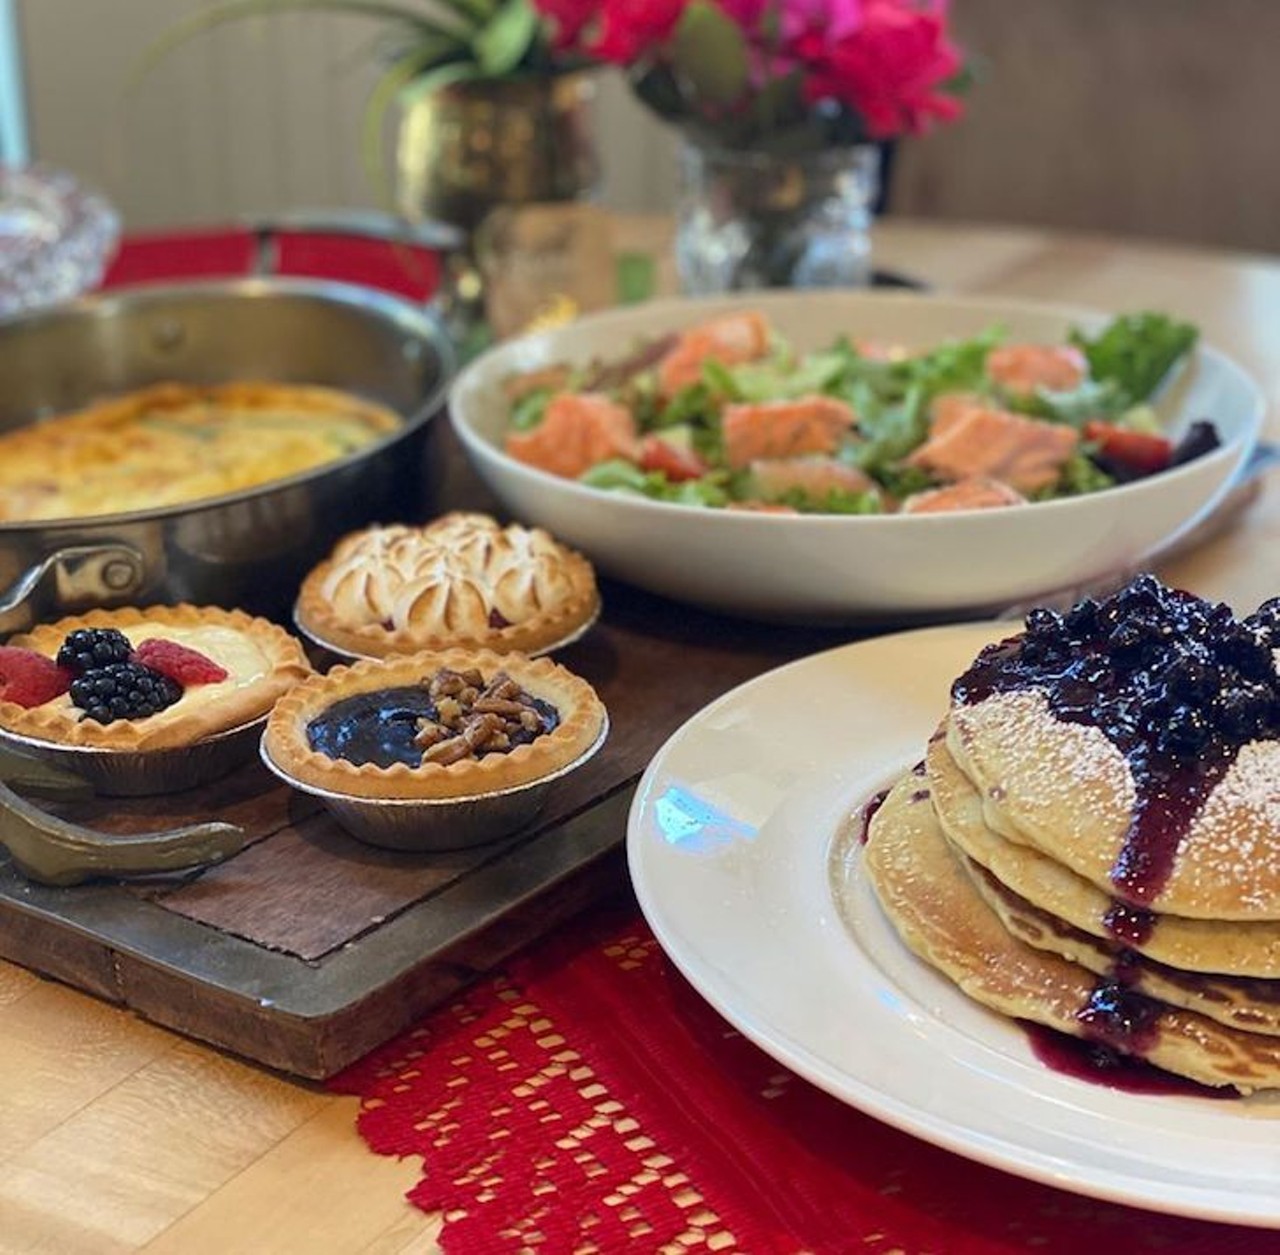 Osprey Tavern 
4899 New Broad St., 407-960-7700
Osprey is offering a big Mother&#146;s Day Brunch spread with optional wine add-ons for delivery or pick-up. Pre-orders open until Friday, May 8. Call the restaurant or preorder on their website.
Photo via Osprey Tavern/Facebook